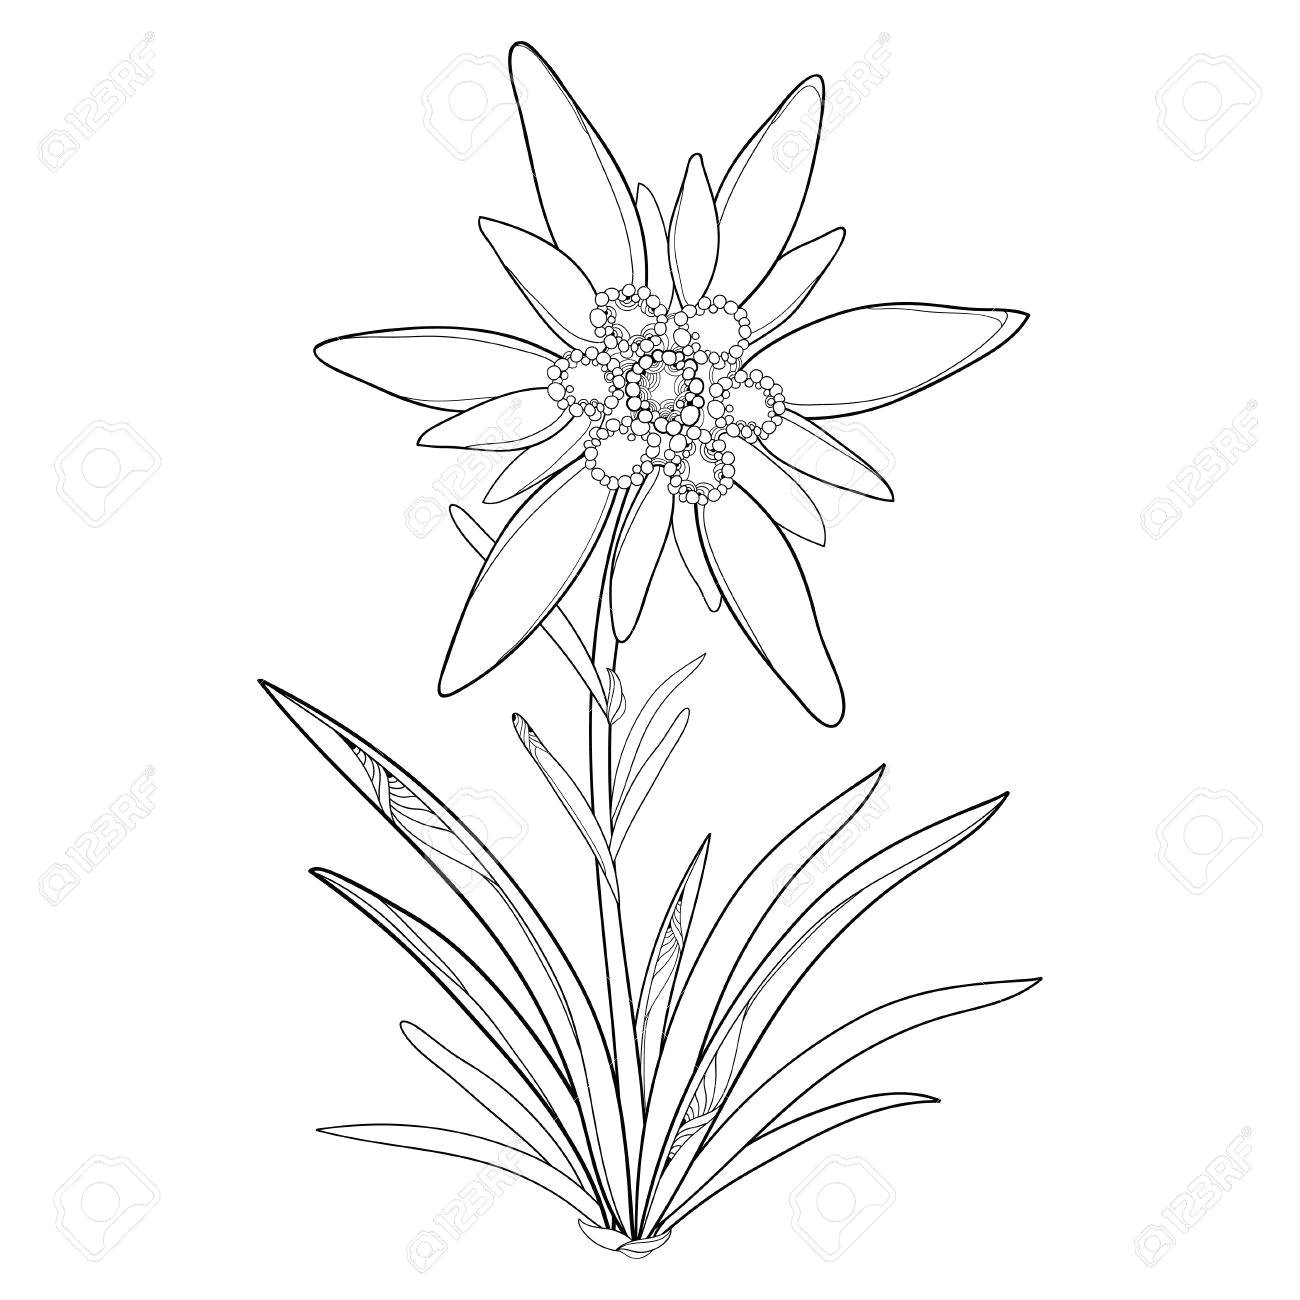 1300x1300 outline edelweiss or leontopodium alpinum flower and leaves